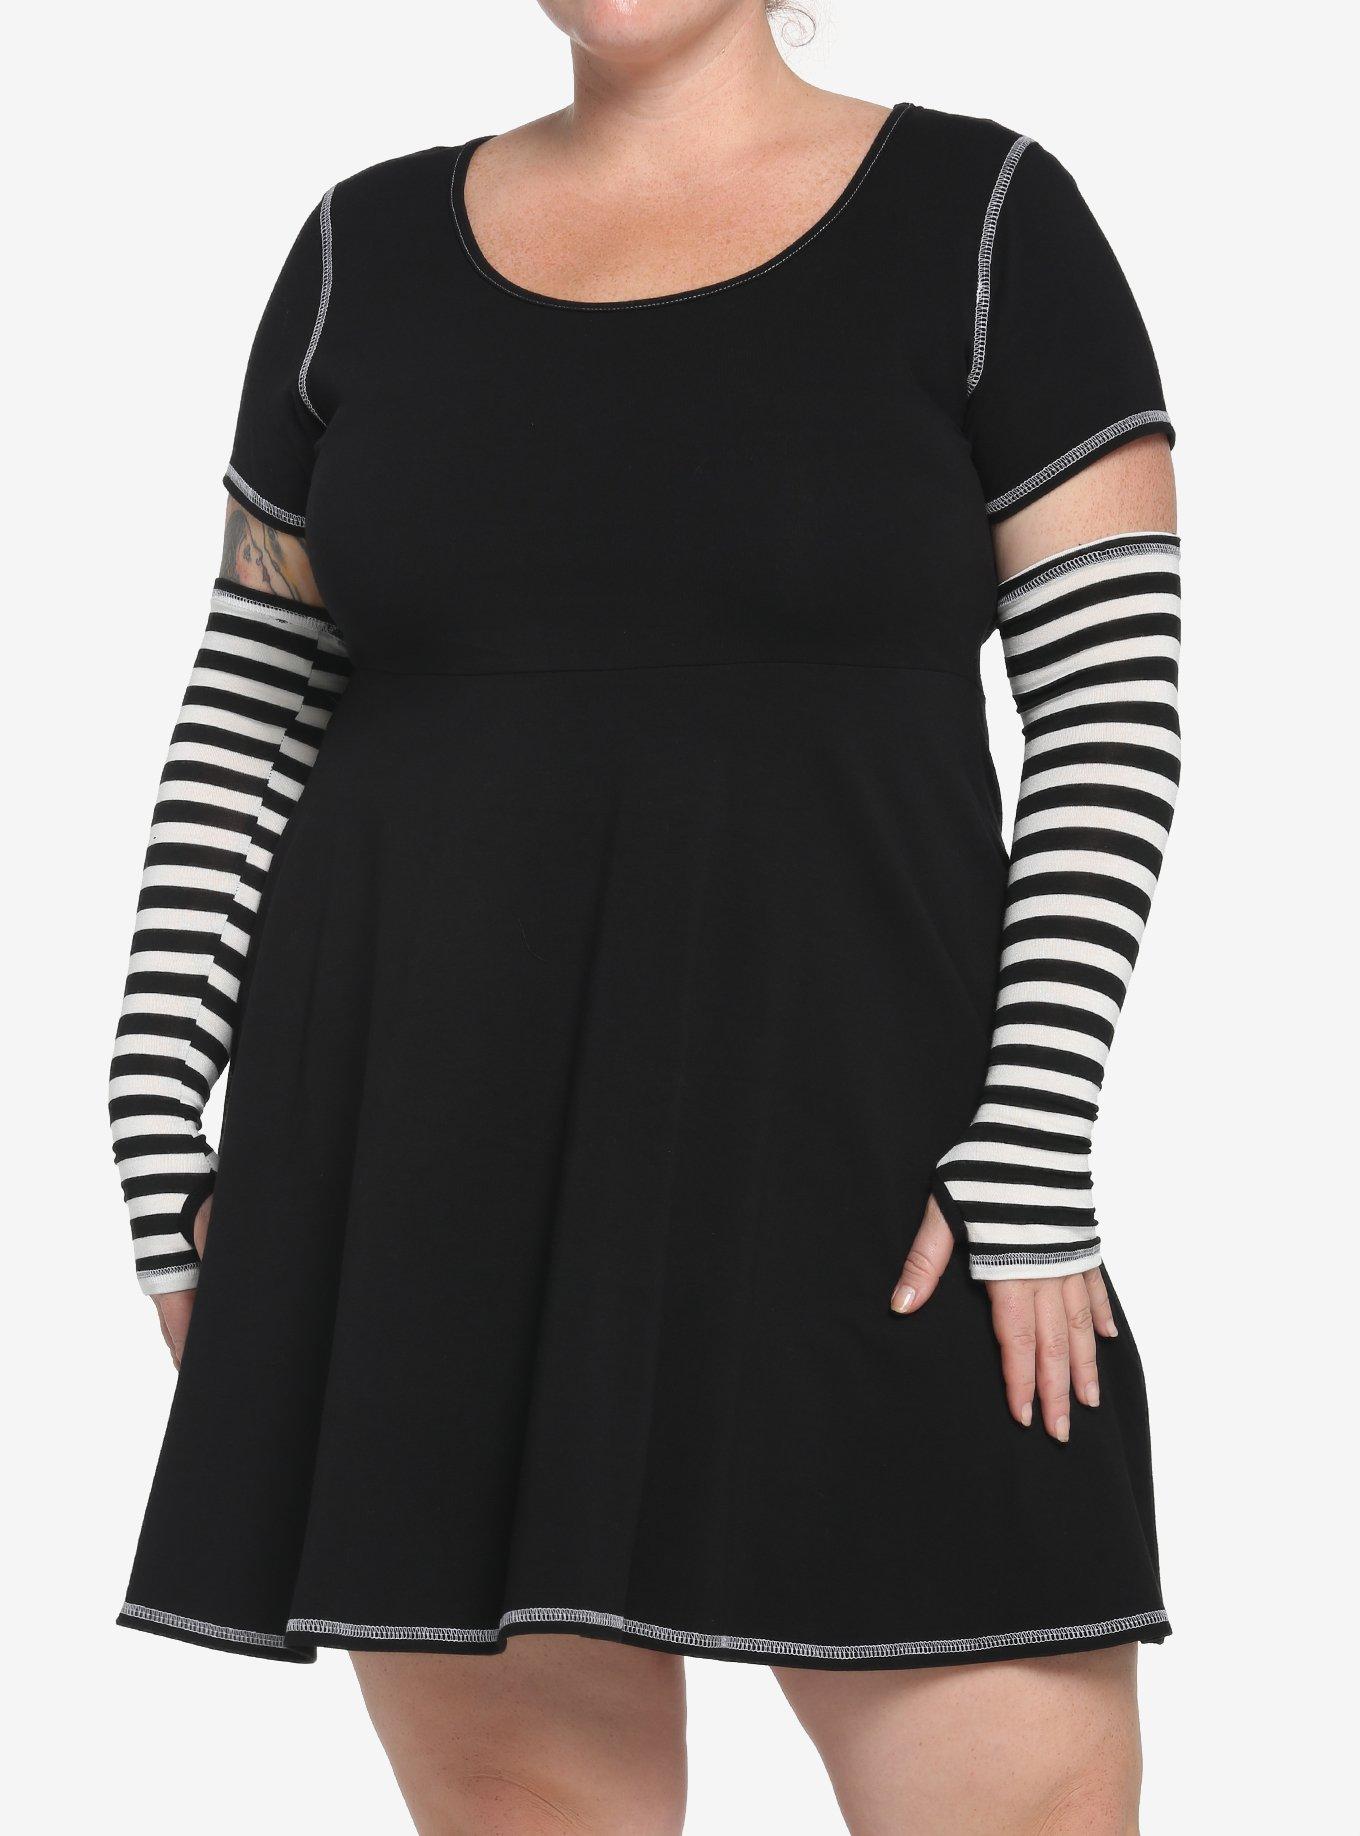 Black & White Contrast Stitch Skater Dress Plus Size With Arm Warmers, MULTI, hi-res